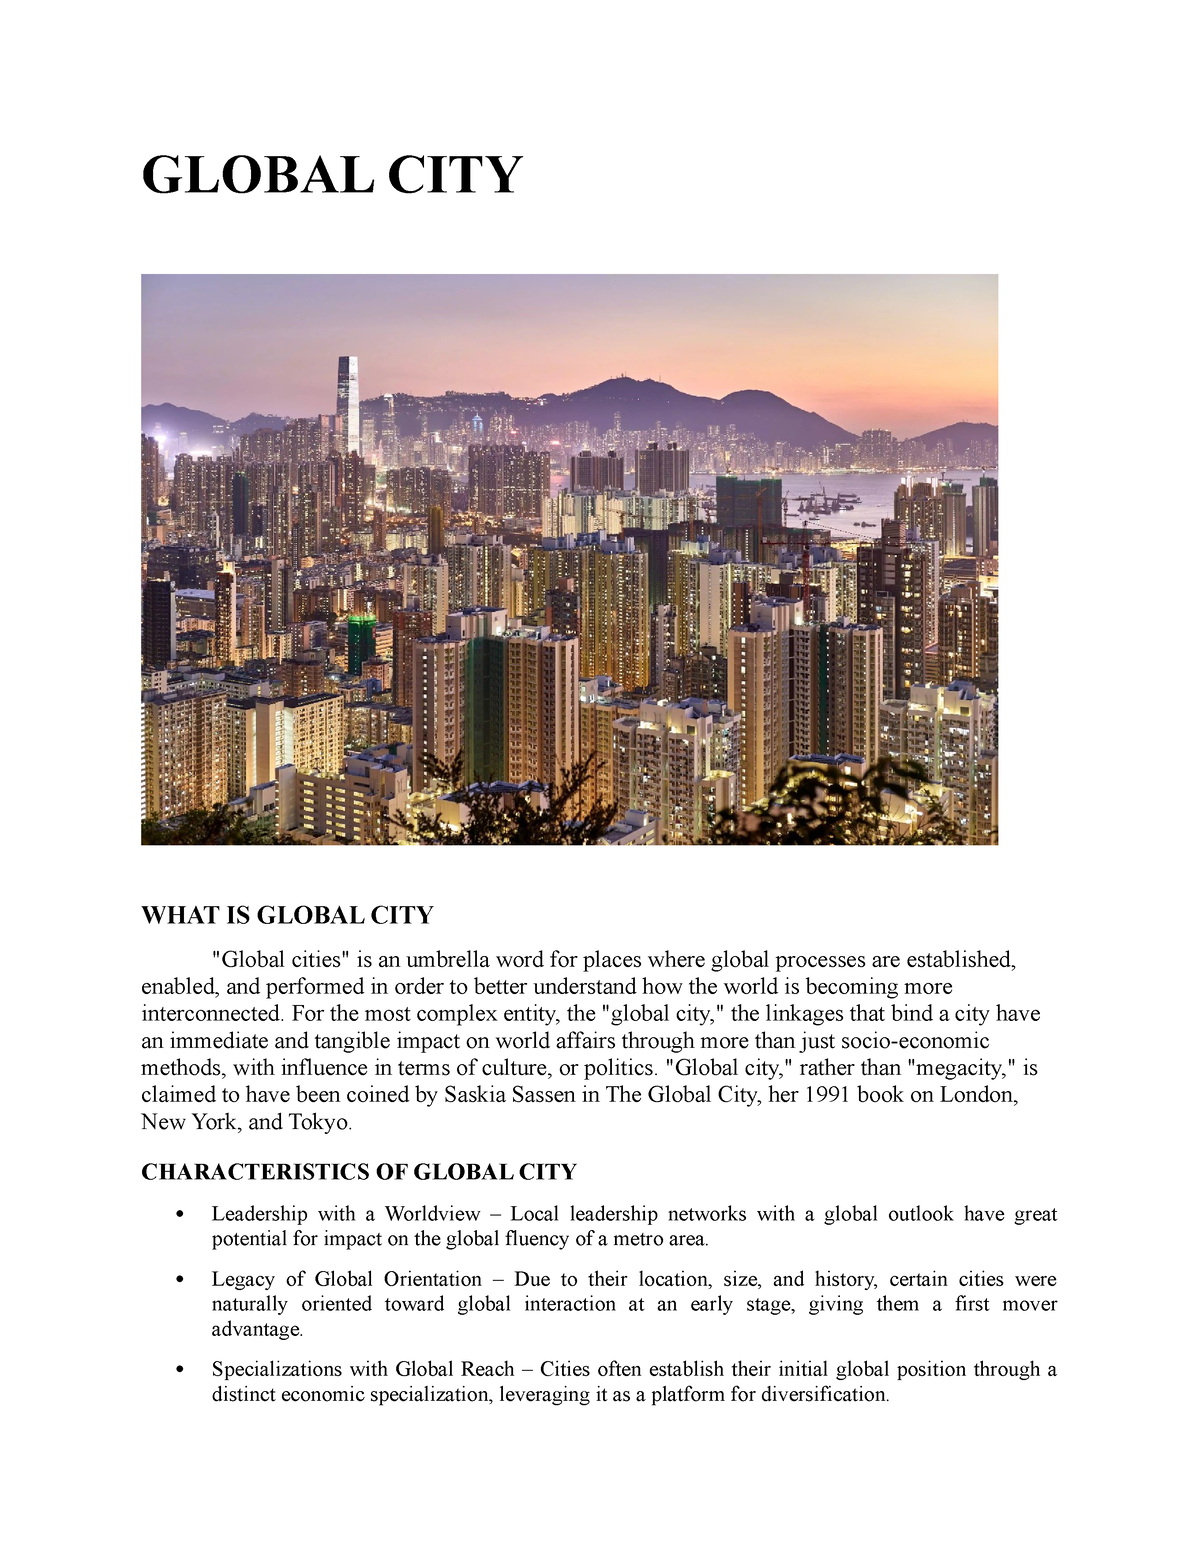 what is global city essay